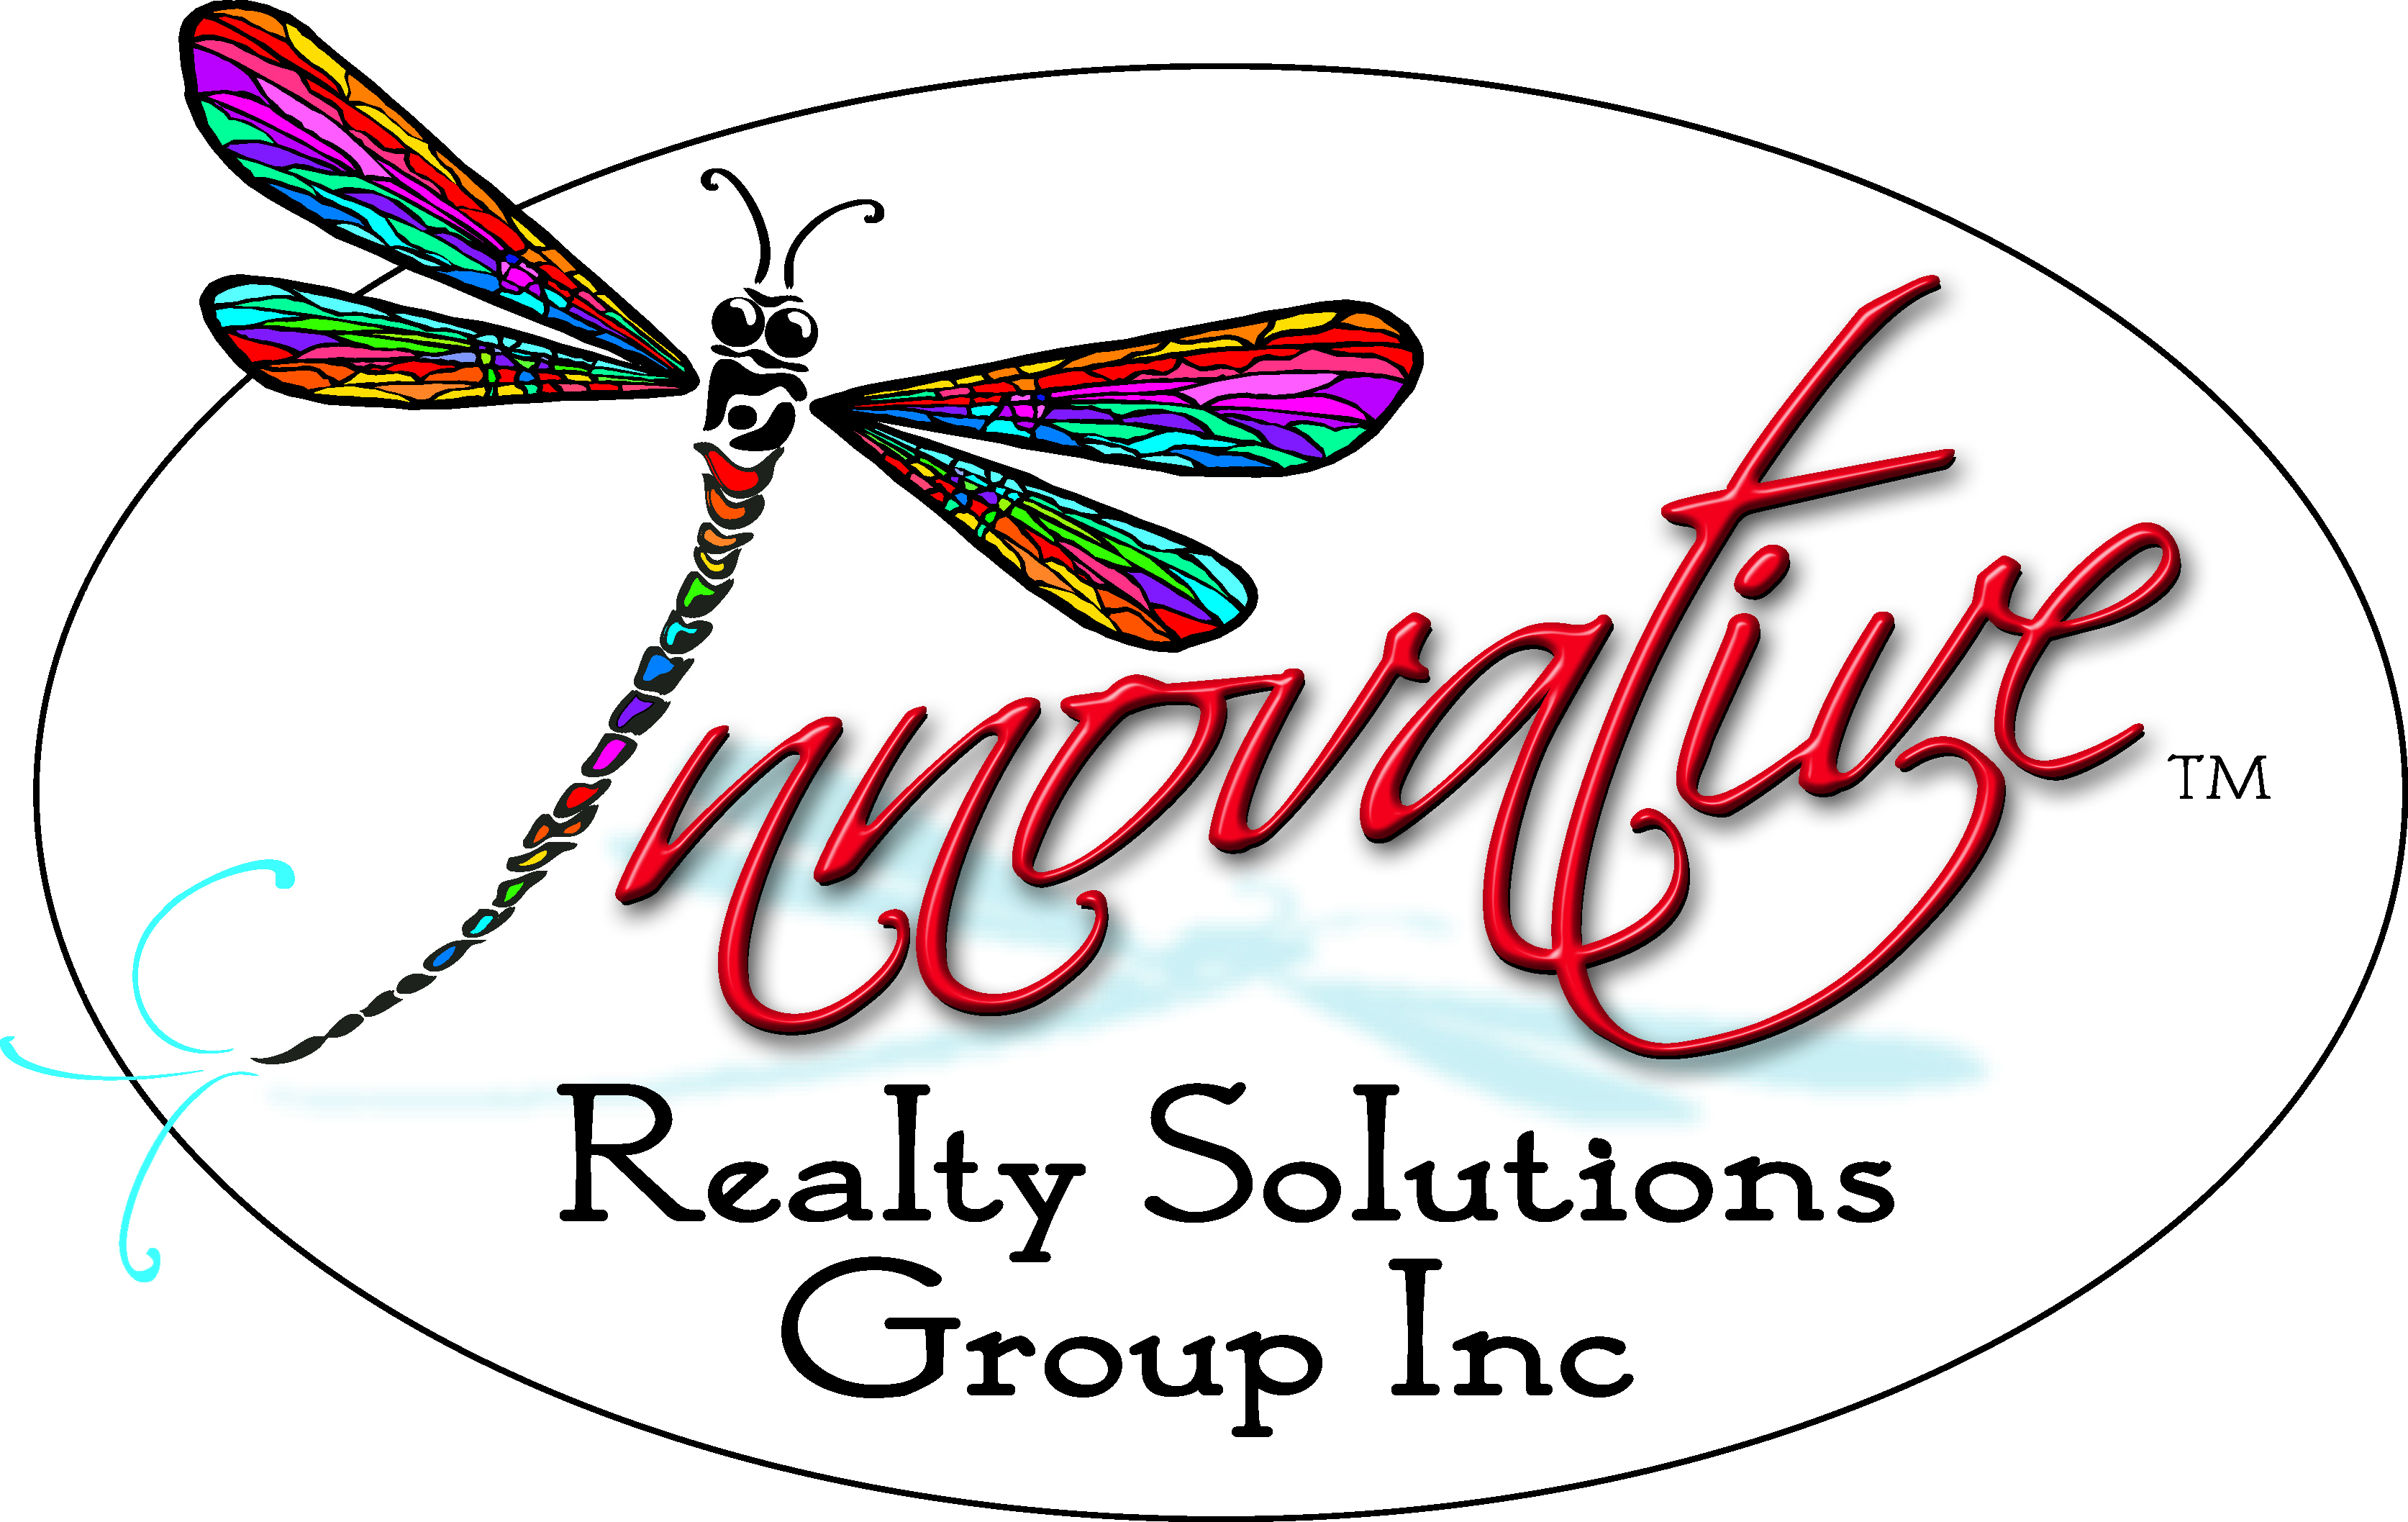 Innovative Realty Solutions Group Inc